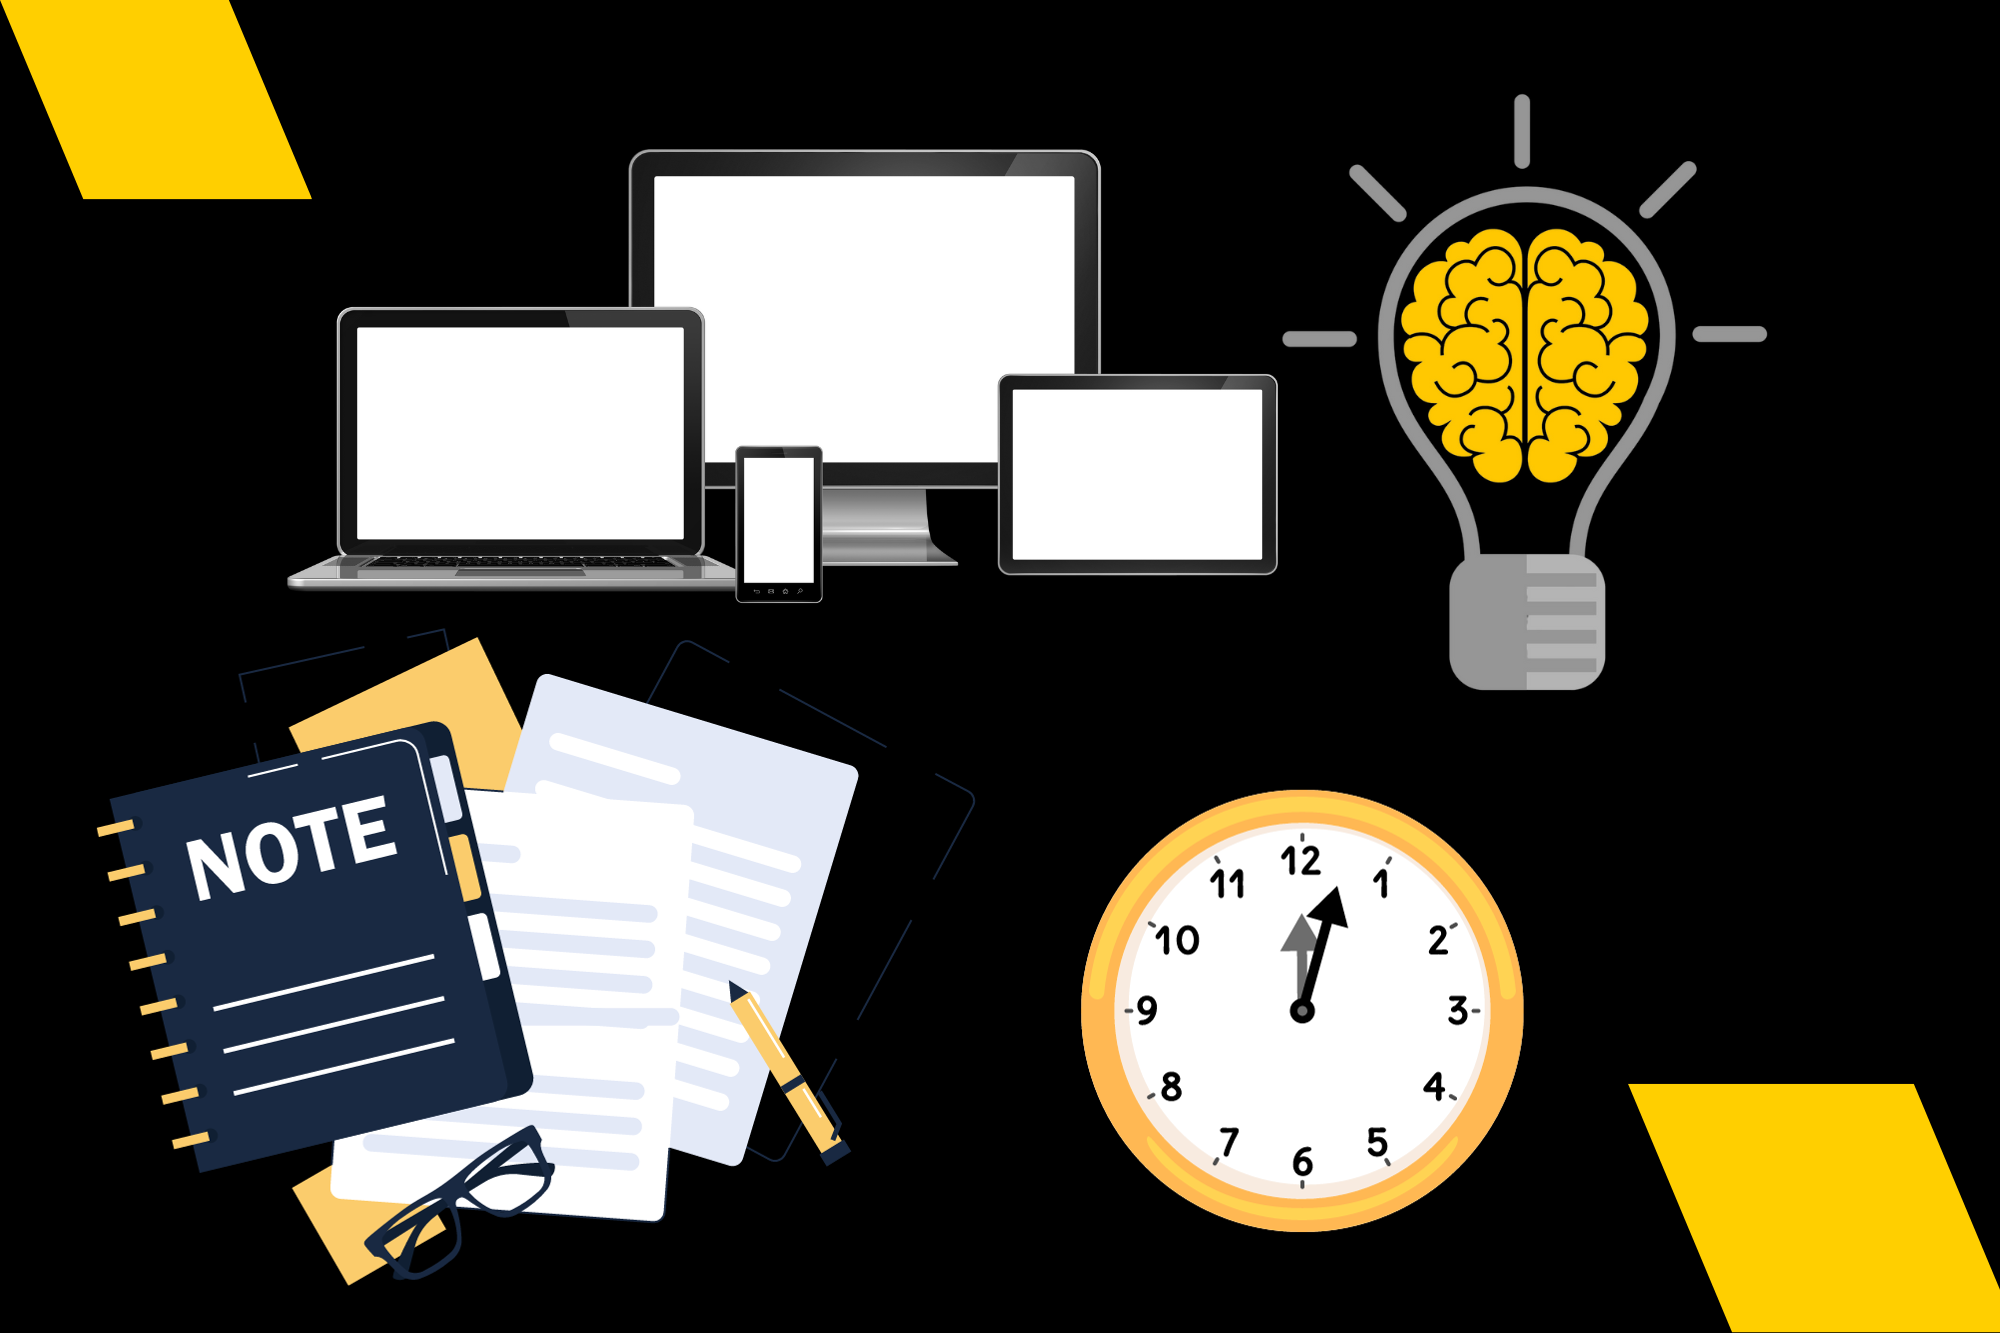 graphics showing laptop, desktop and mobile; notebook, clock, brain in lightbulb icon